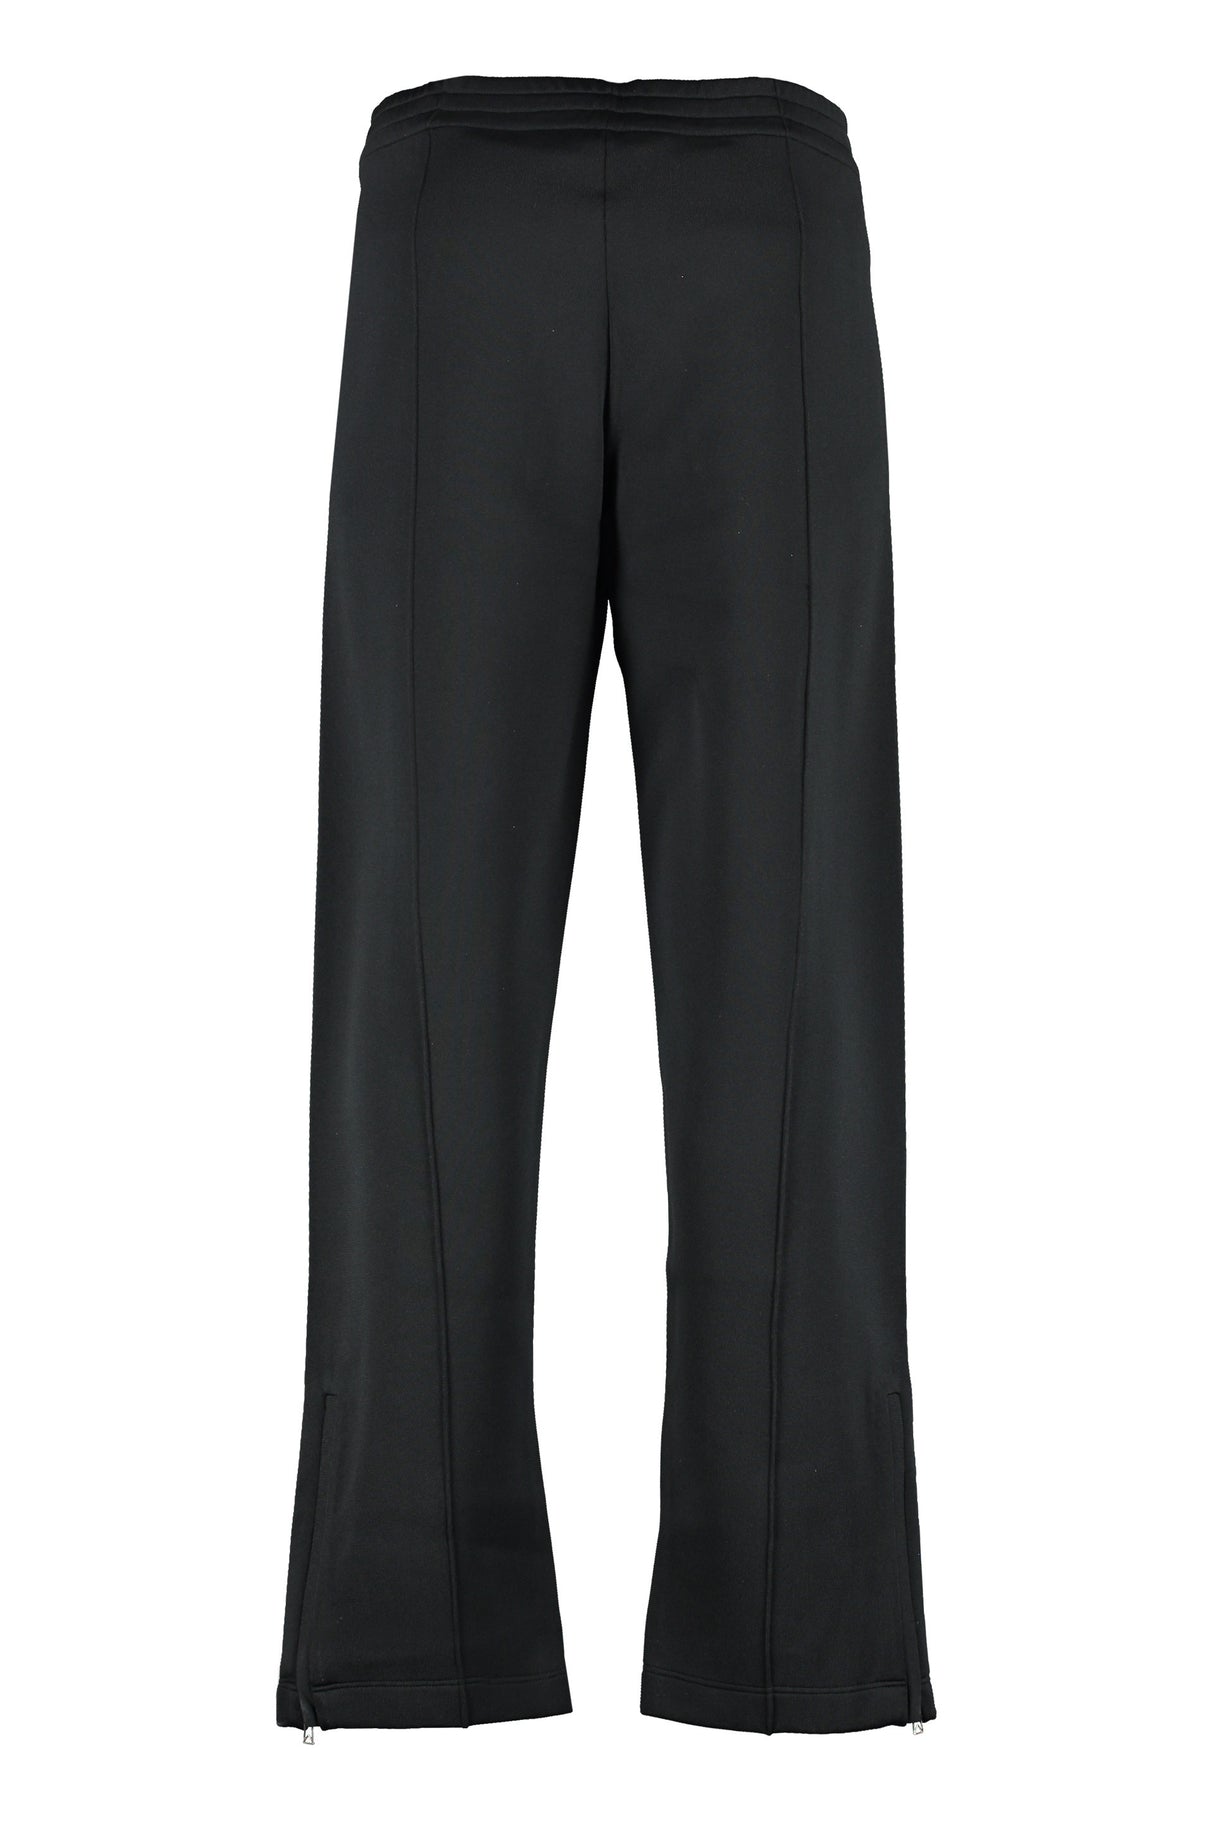 Black Technical Fabric Pants with Extendable Side Zipper